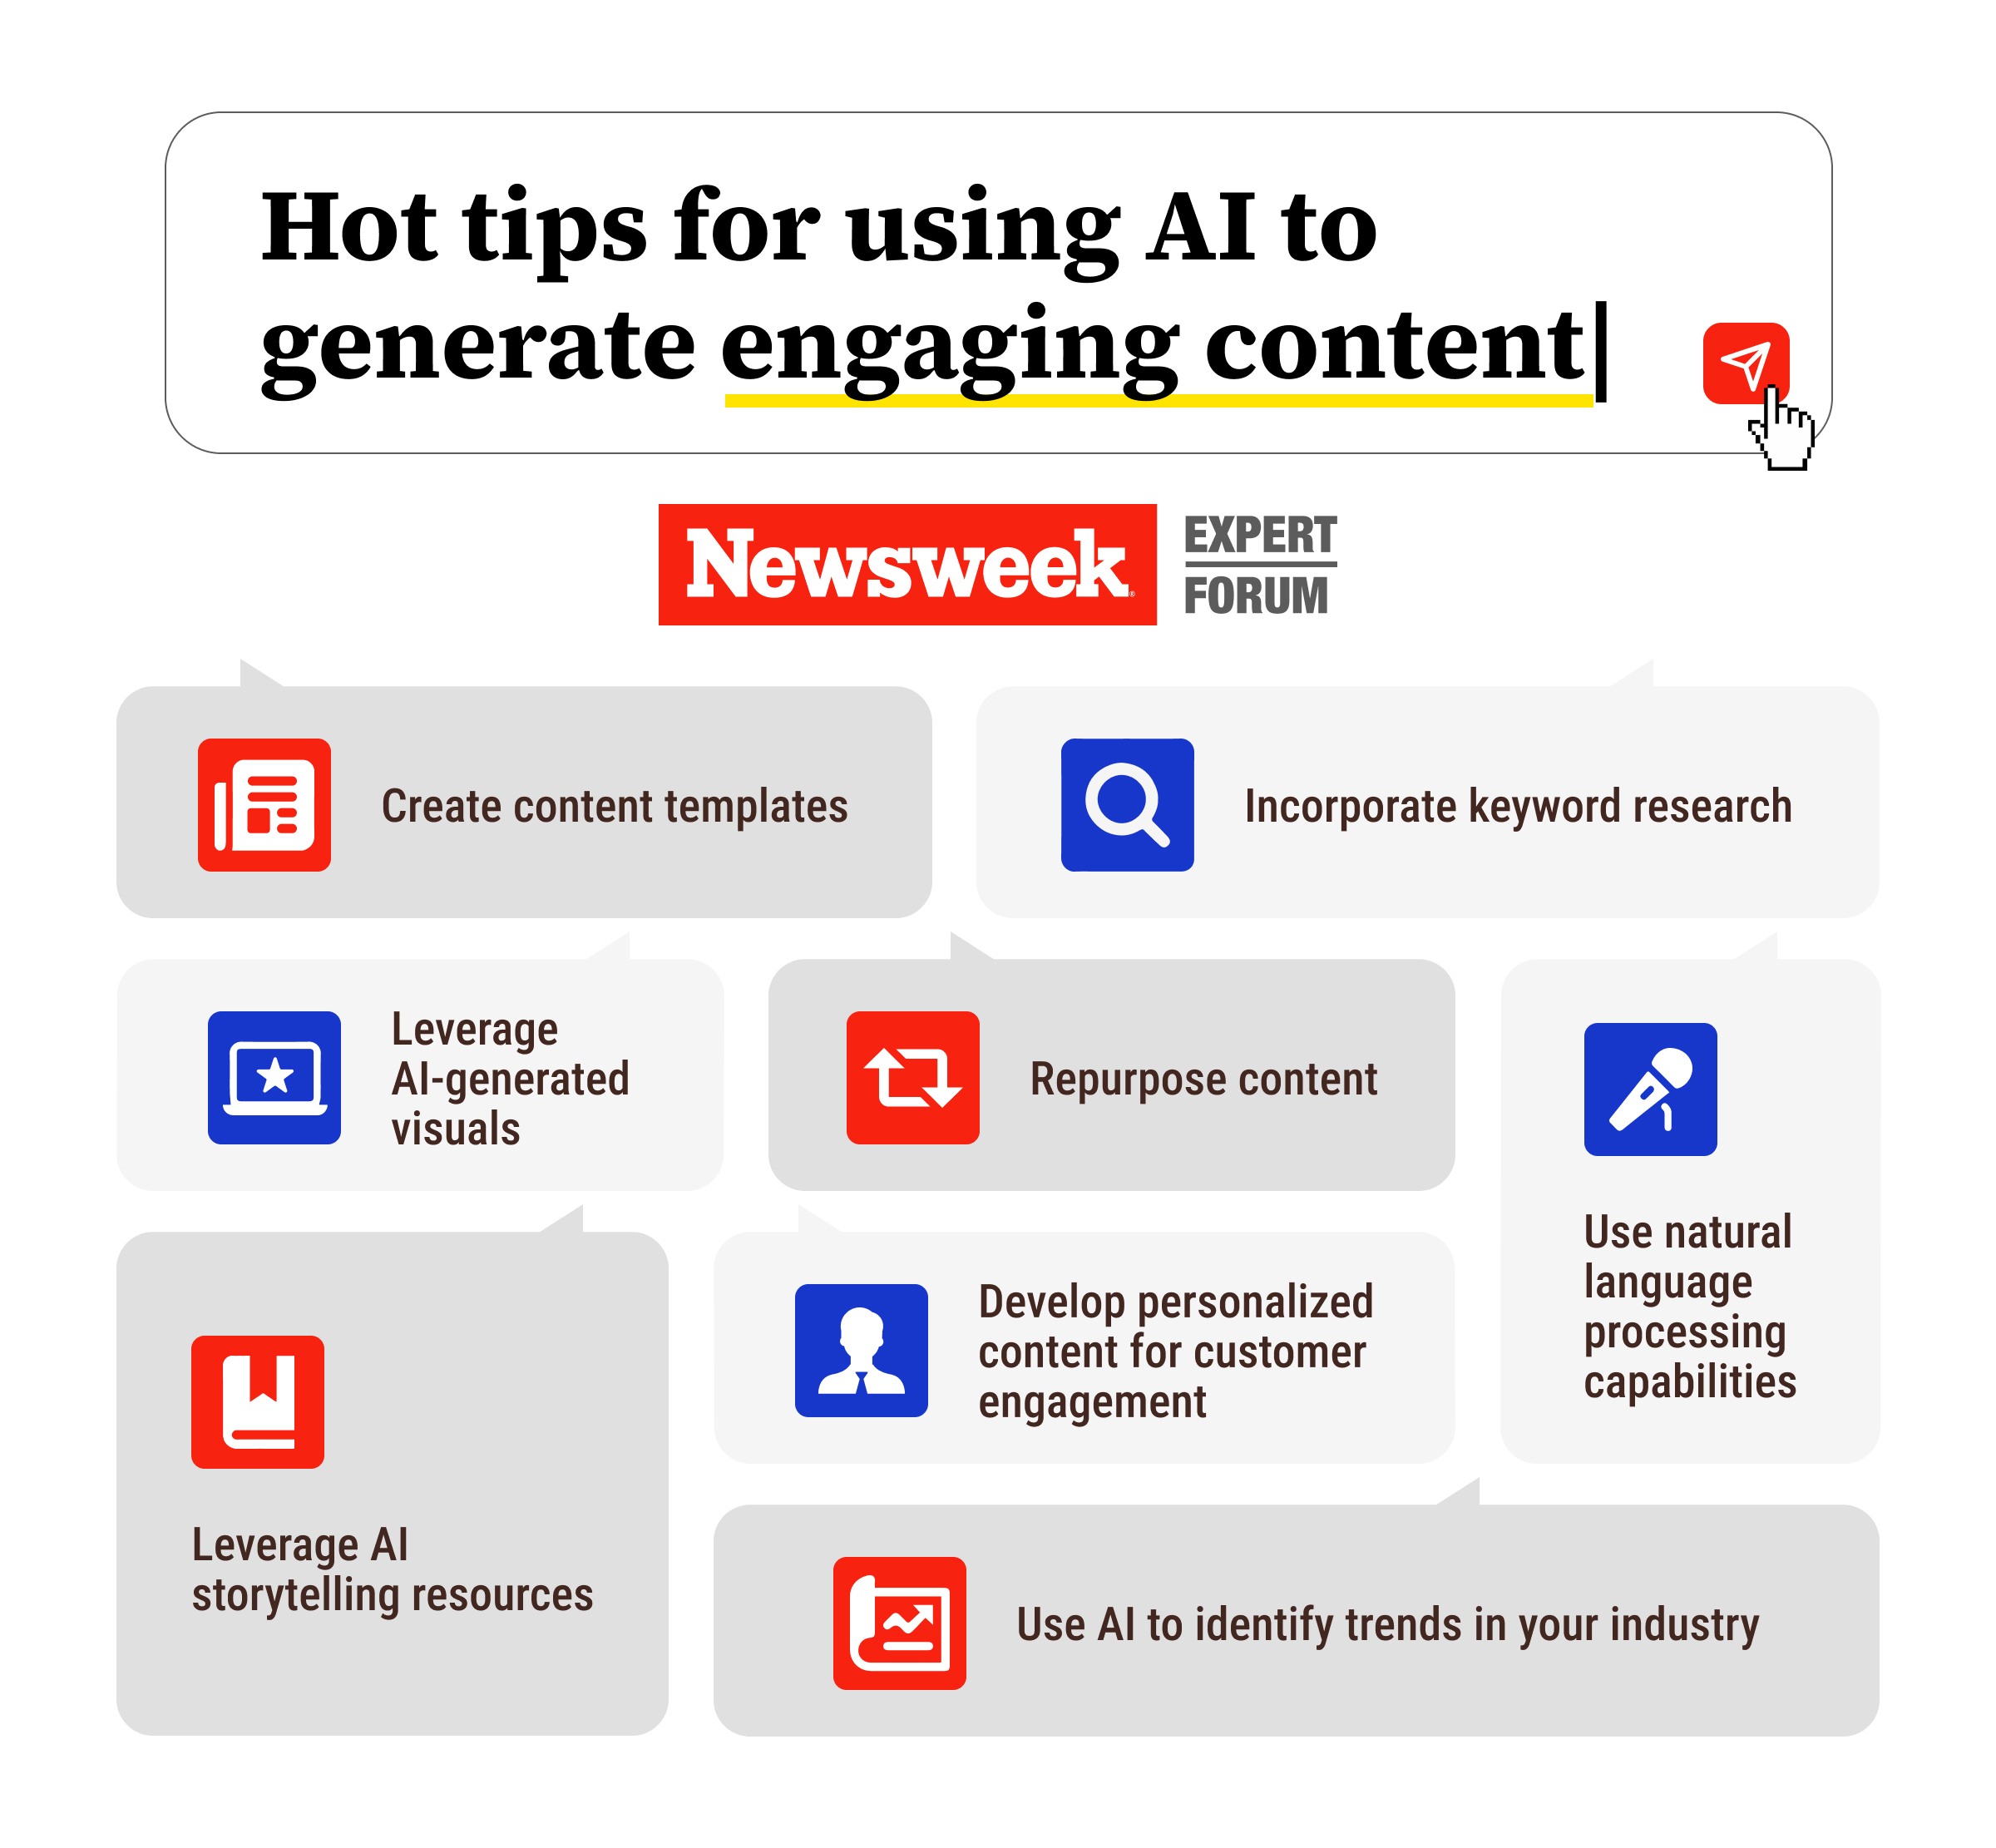 Hot-tips-for-using-AI-to-generate-engaging-content-A